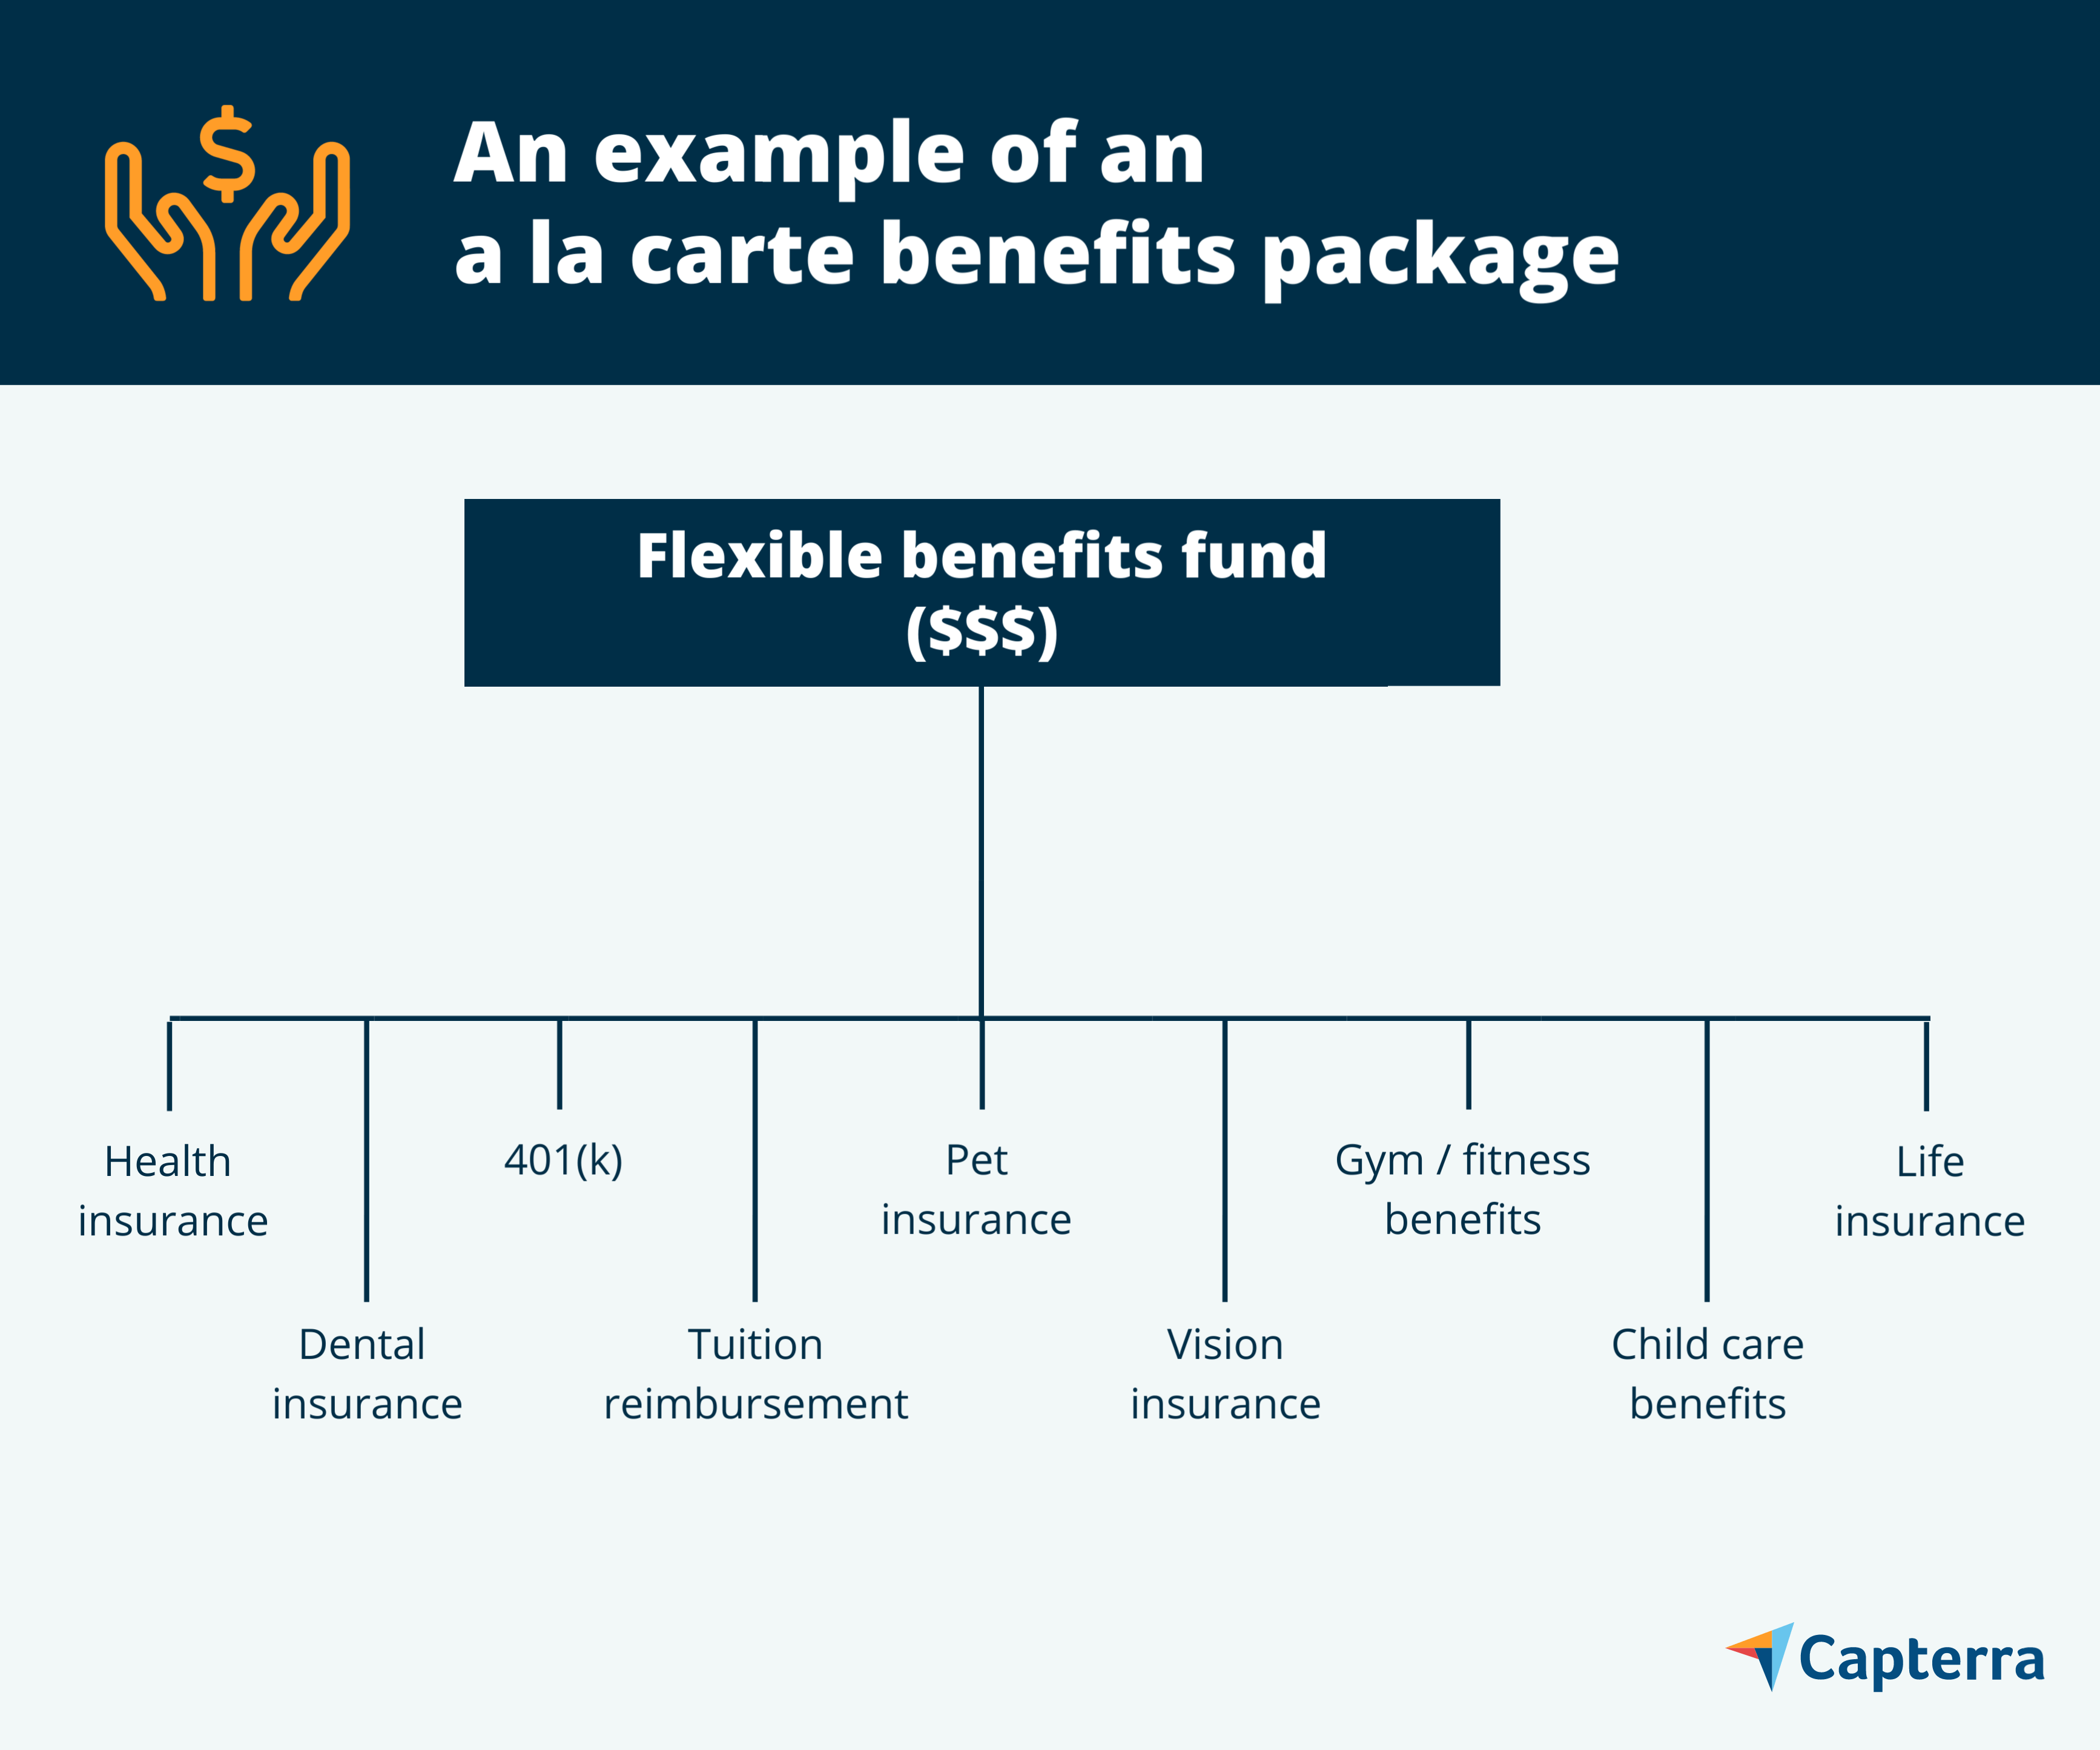 Example of an a la carte benefits package for the blog article "Employee Benefits Lack Choice. A New Trend Called “A La Carte” Benefits Can Help."